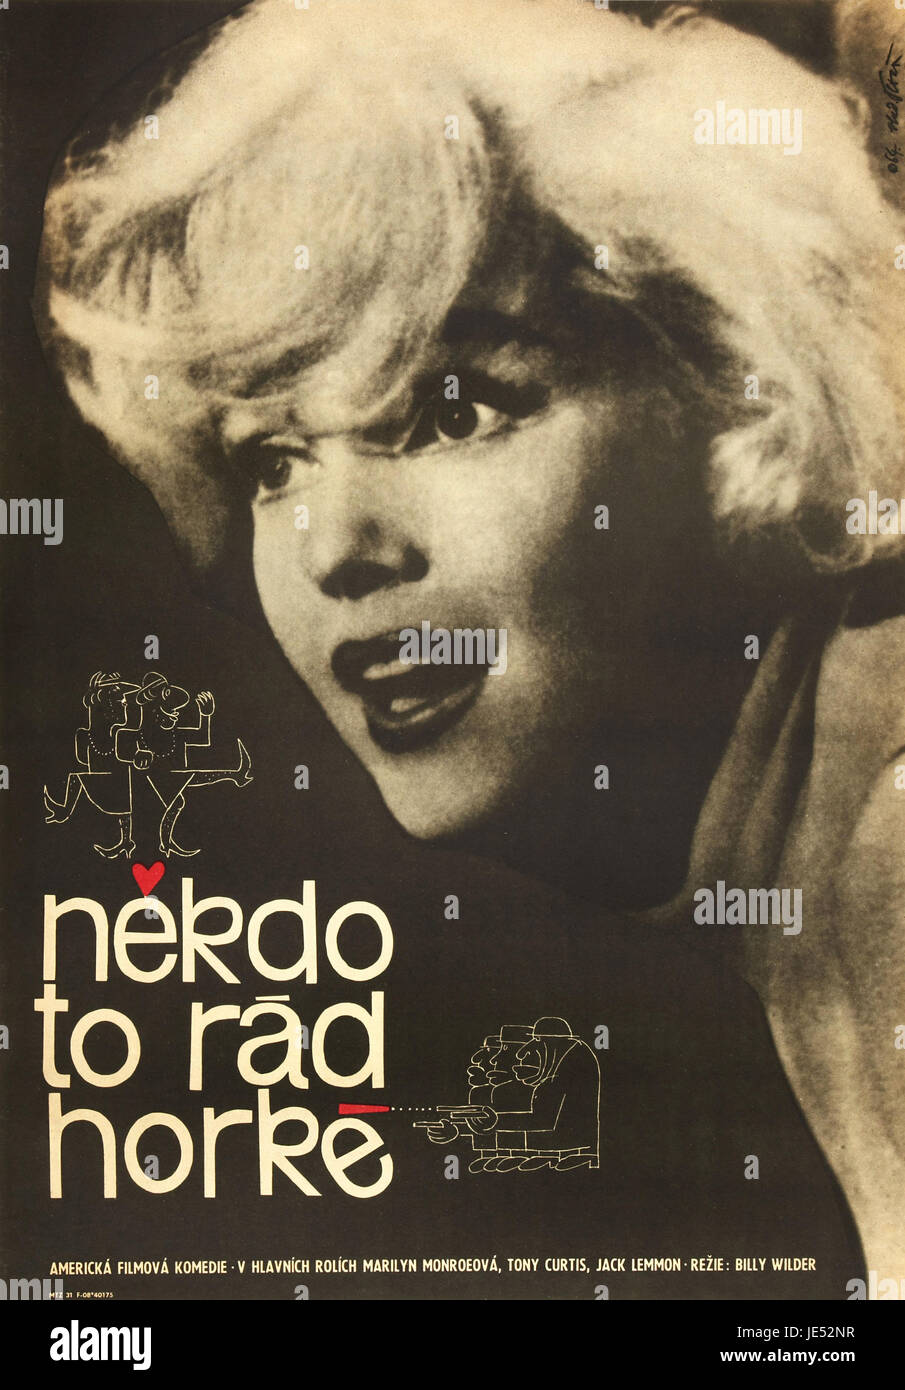 Some Like It Hot. Original Czechoslovak movie poster for american film comedy of Billy Wilder from 1959, with Marylin Monroe. Stock Photo